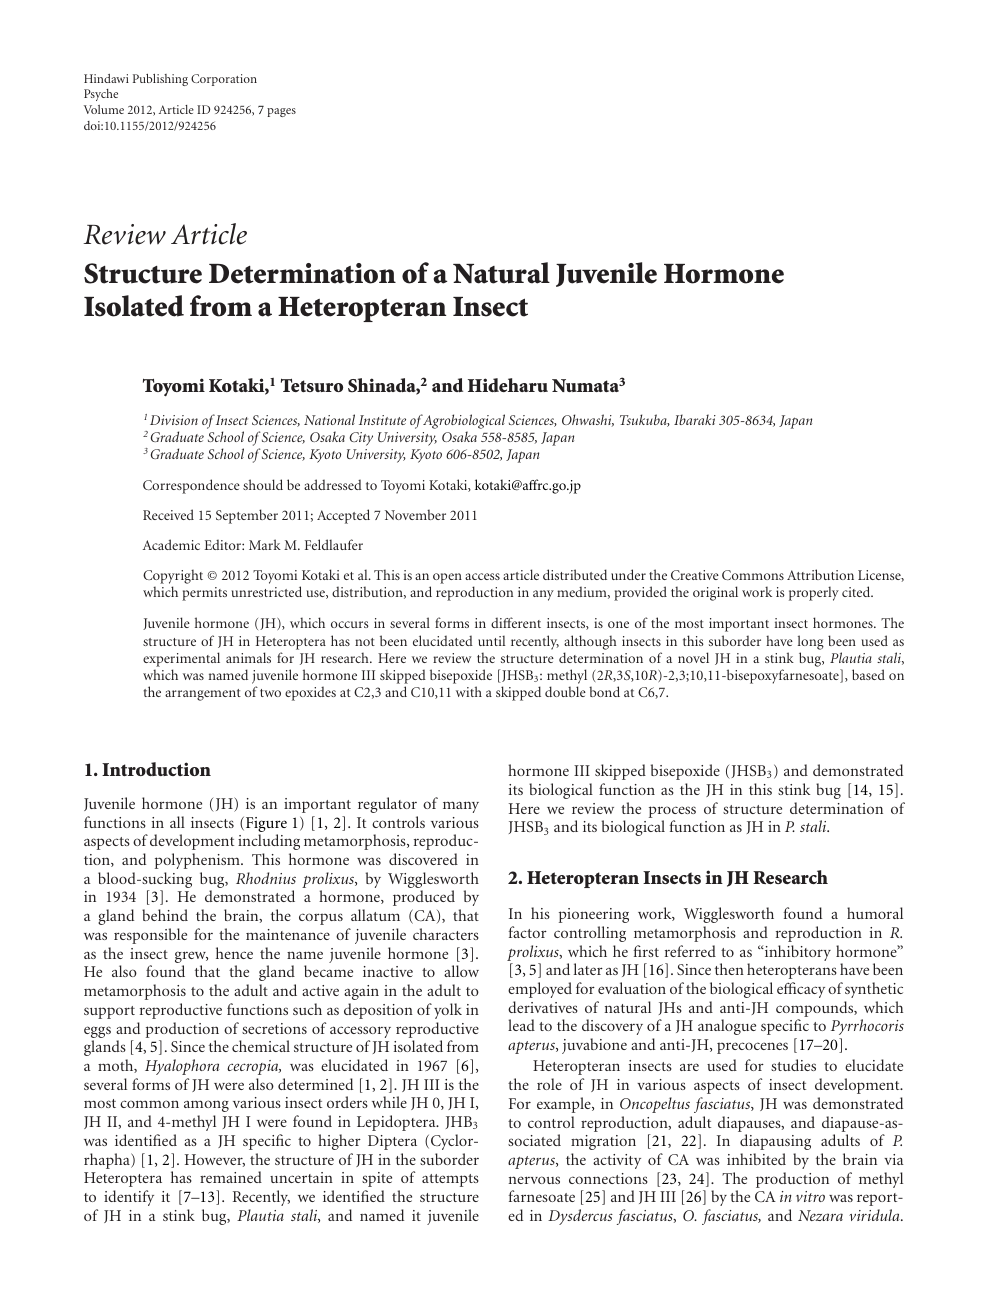 Structure Determination Of A Natural Juvenile Hormone Isolated From A Heteropteran Insect Topic Of Research Paper In Biological Sciences Download Scholarly Article Pdf And Read For Free On Cyberleninka Open Science